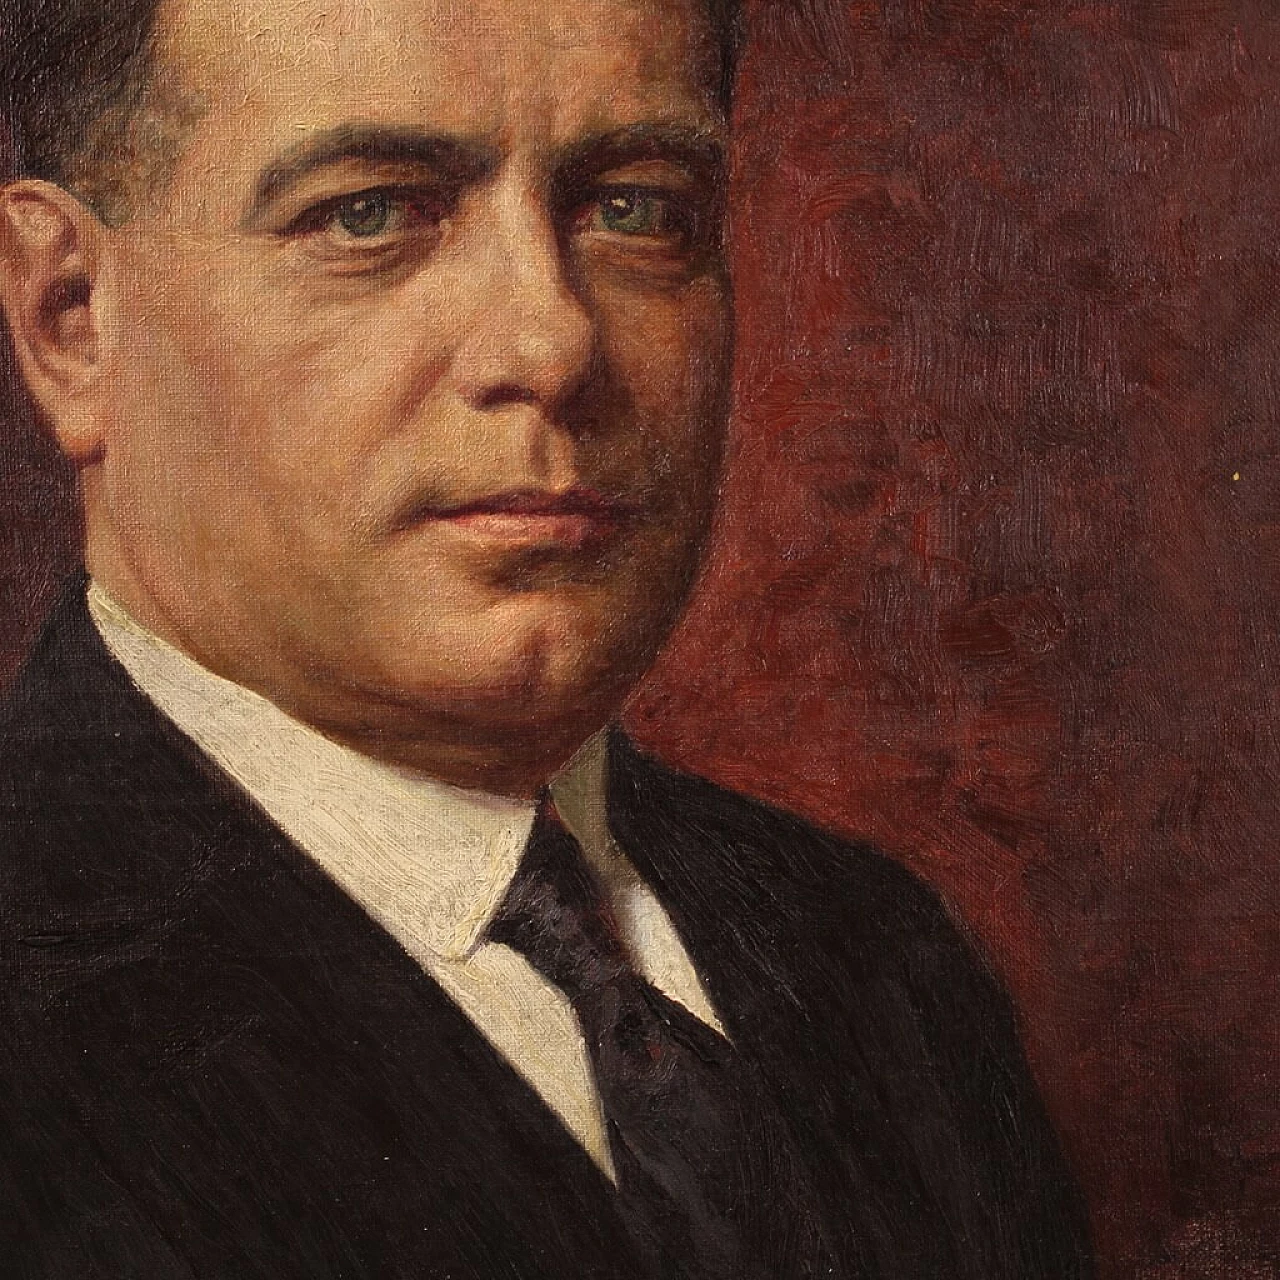 Angelo Garino, male portrait, oil painting on canvas, 1931 8